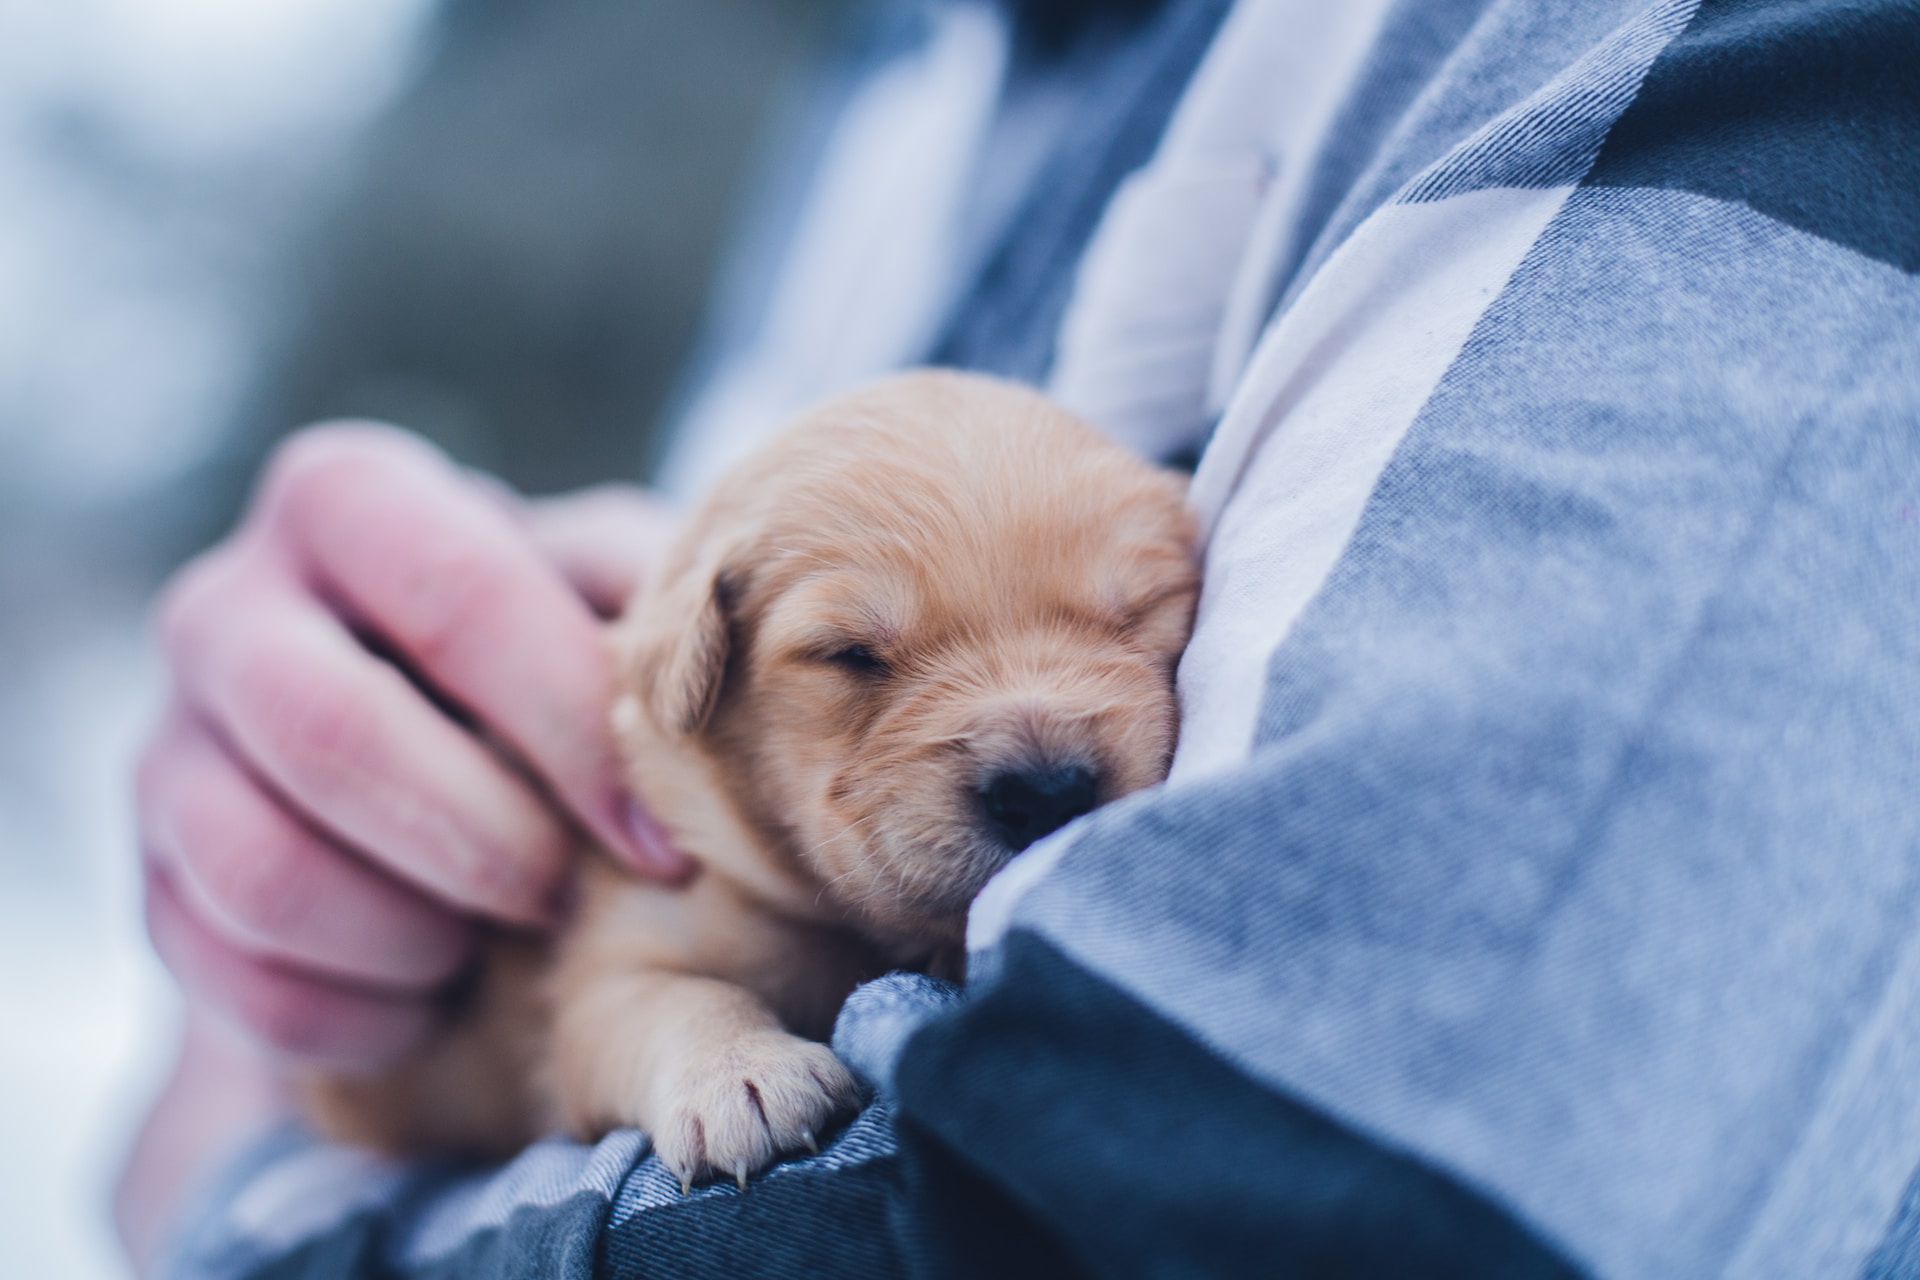 A puppy sleeping in a man's arms